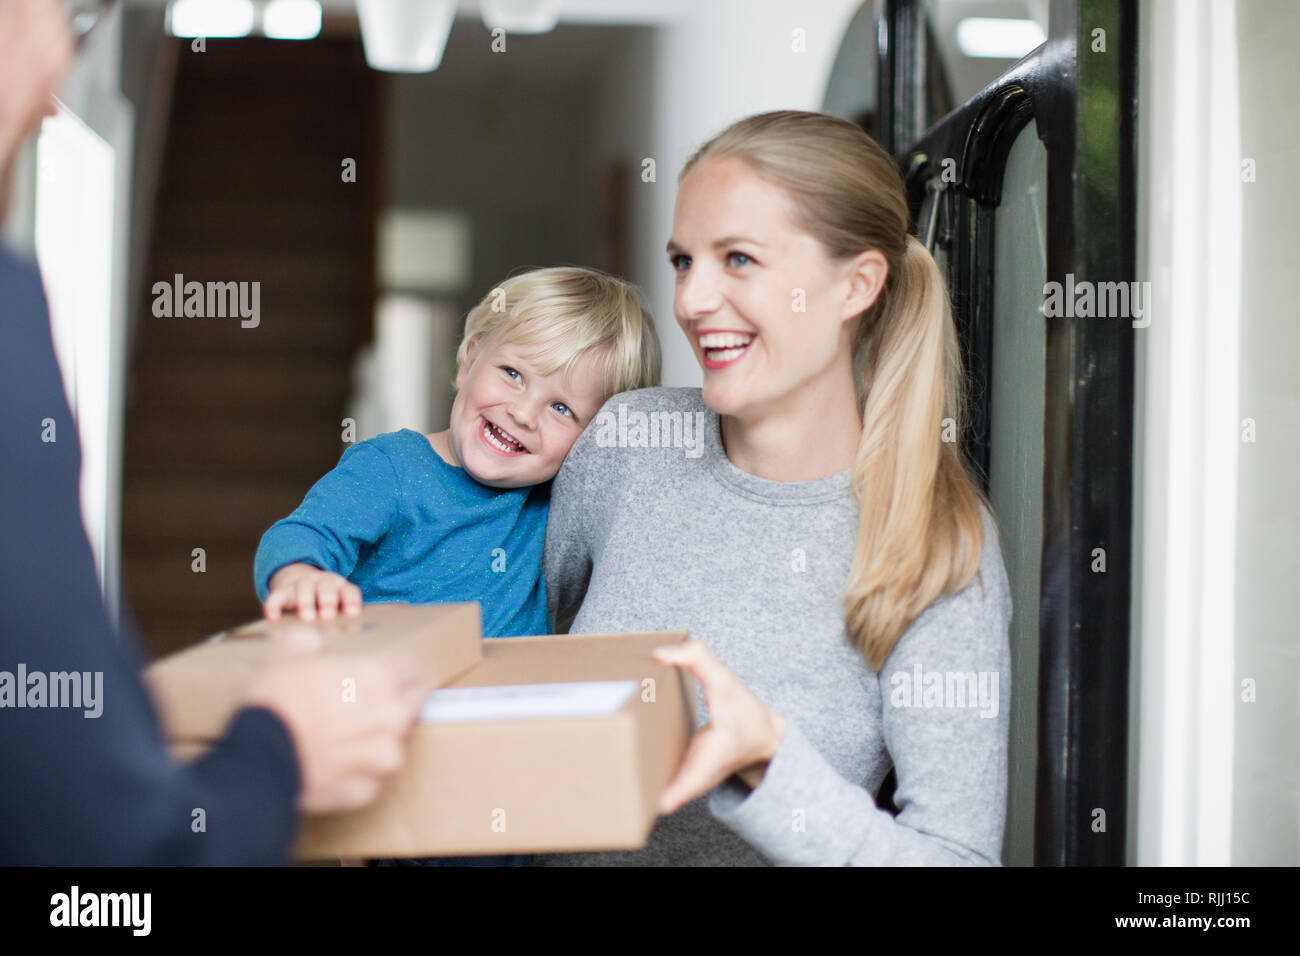 Young family receiving a home delivery Stock Photo